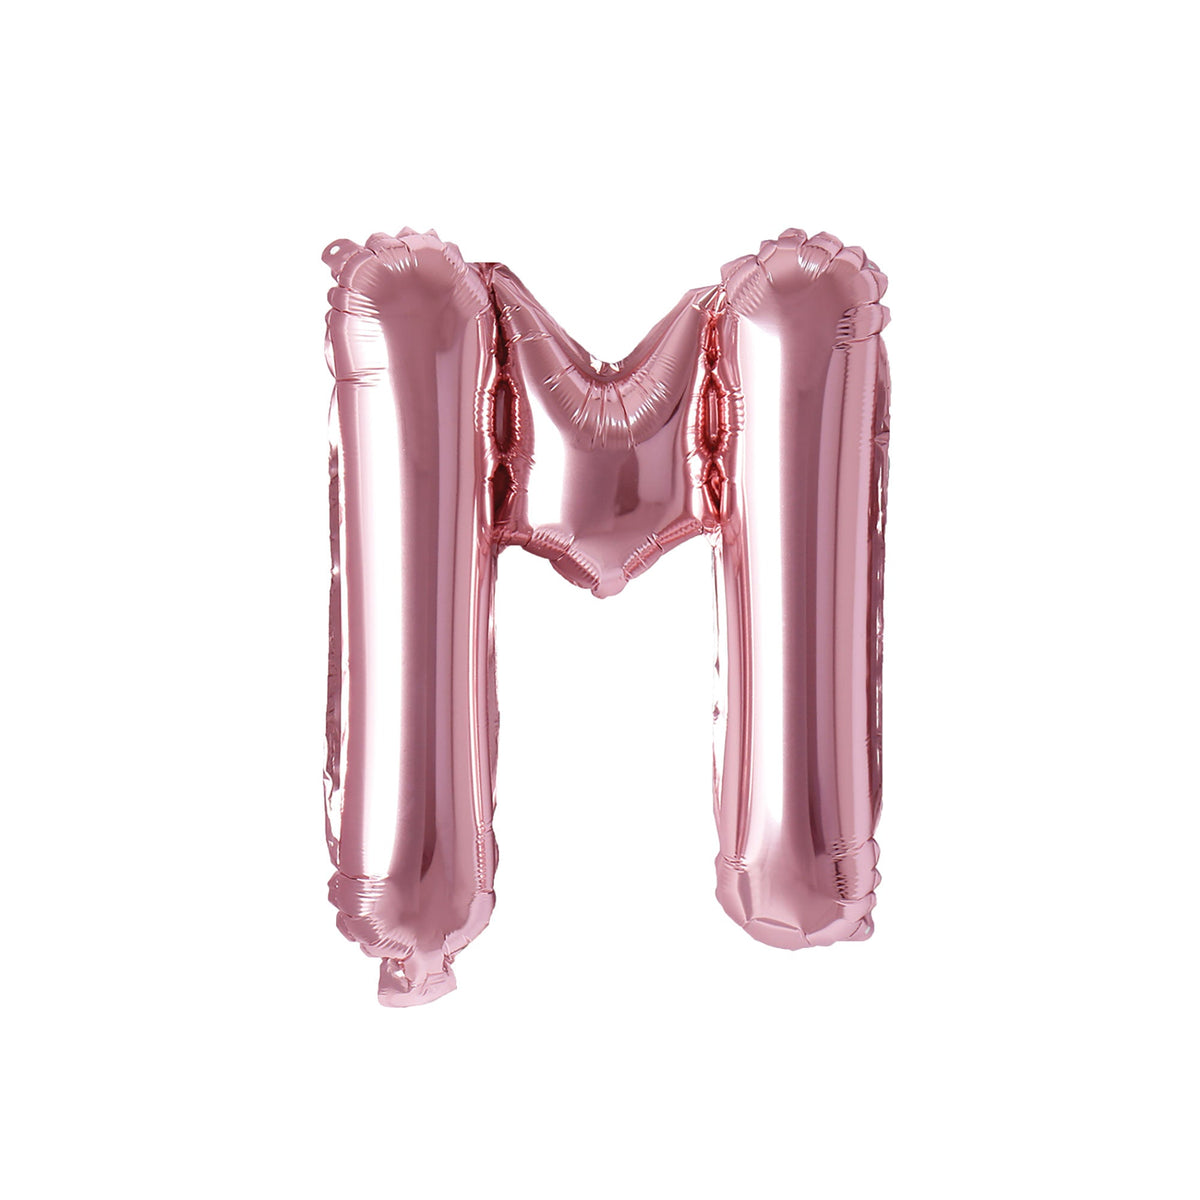 PARTY EXPERT Balloons Rose Gold Letter M Foil Balloon, 16 Inches, 1 Count 810064194313